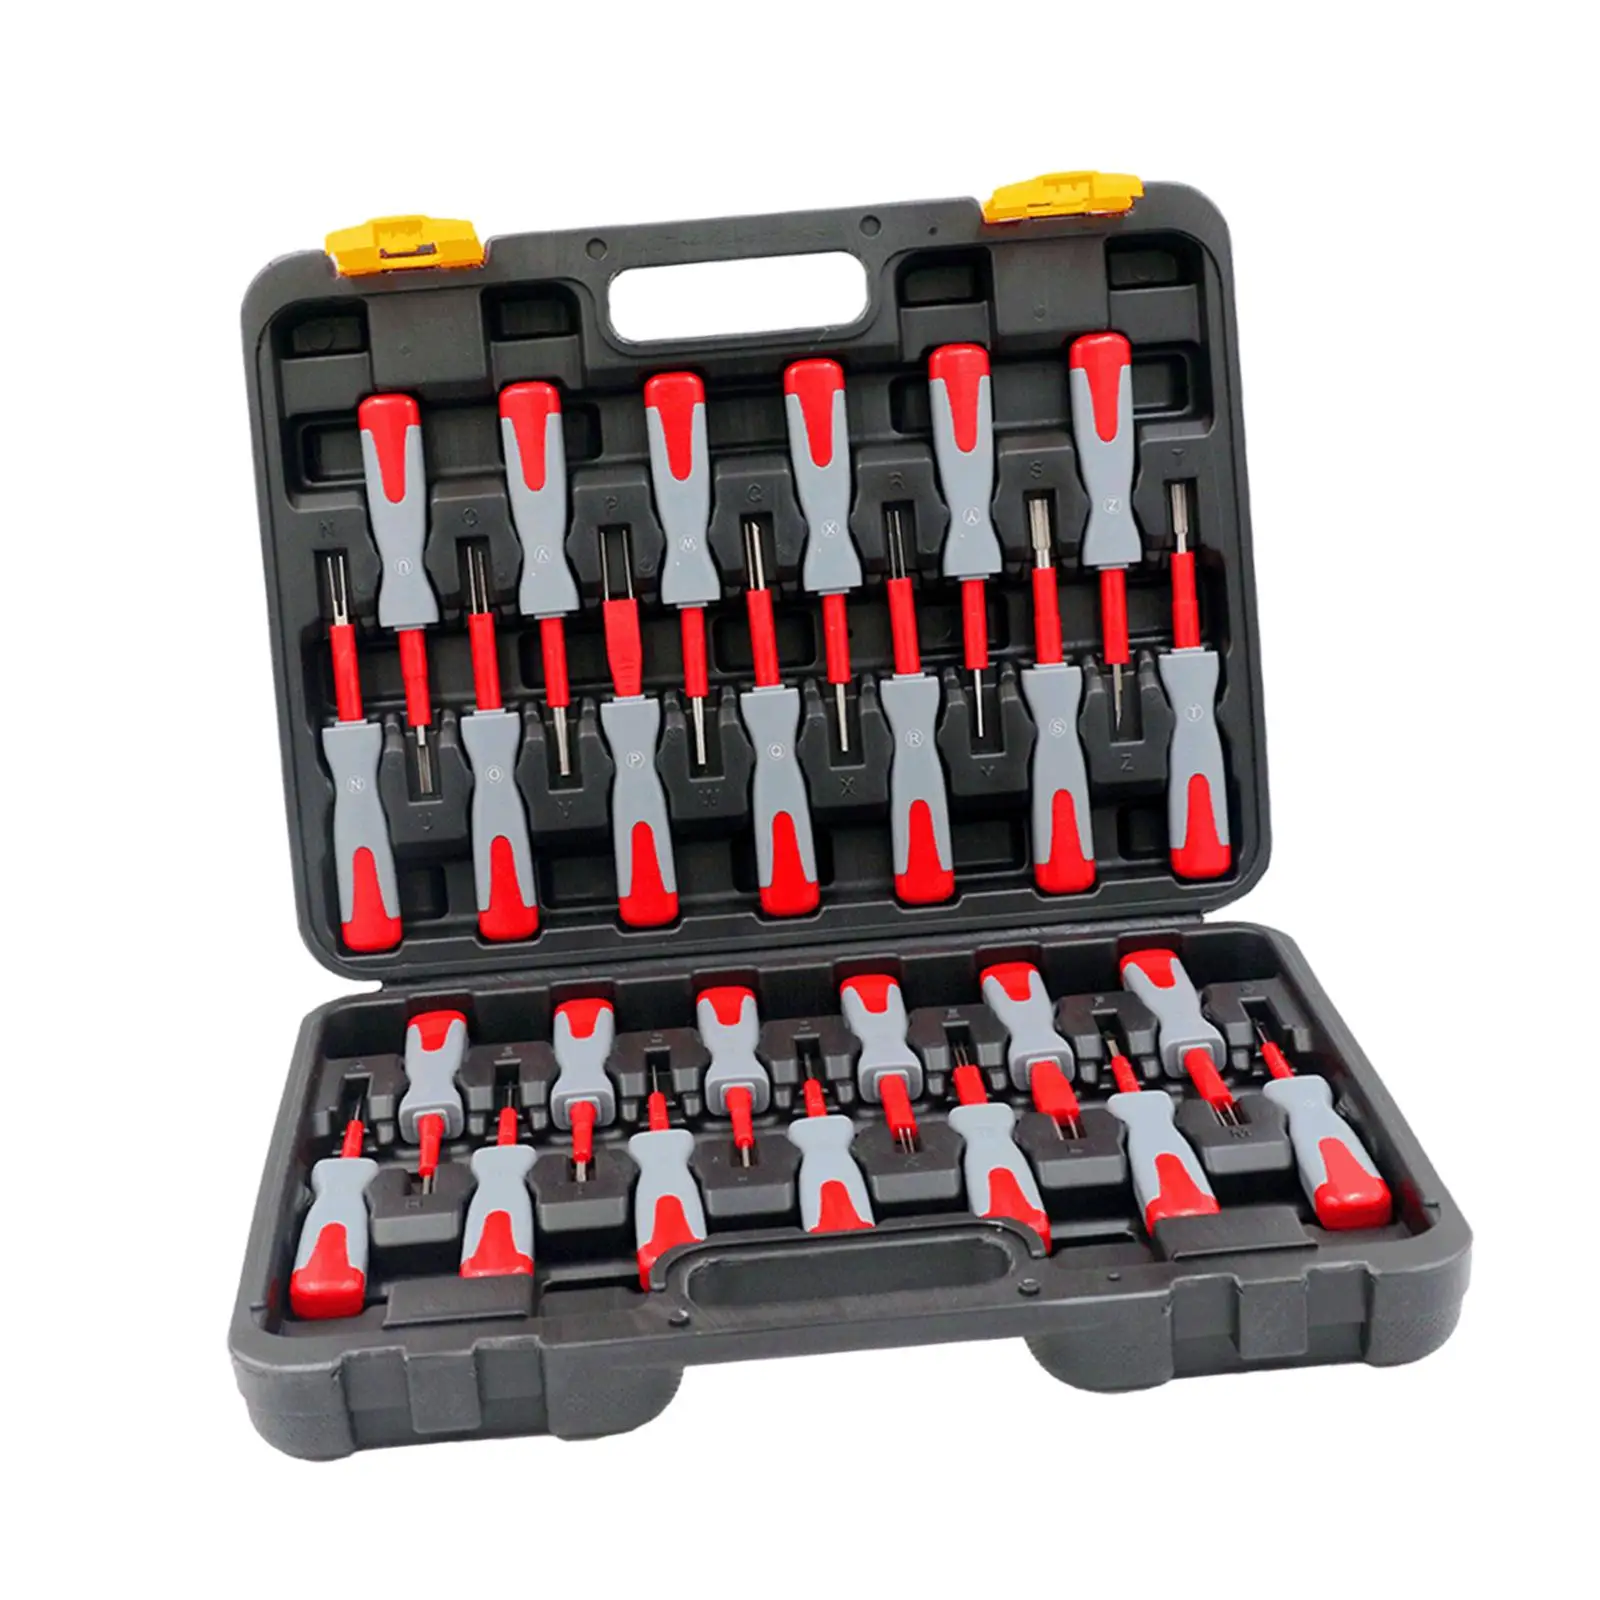 26x Car Terminal Removal Tool Kit Electrical Removal Tools Car Repair Extractor Other Household Devices Ejector Carrying Case